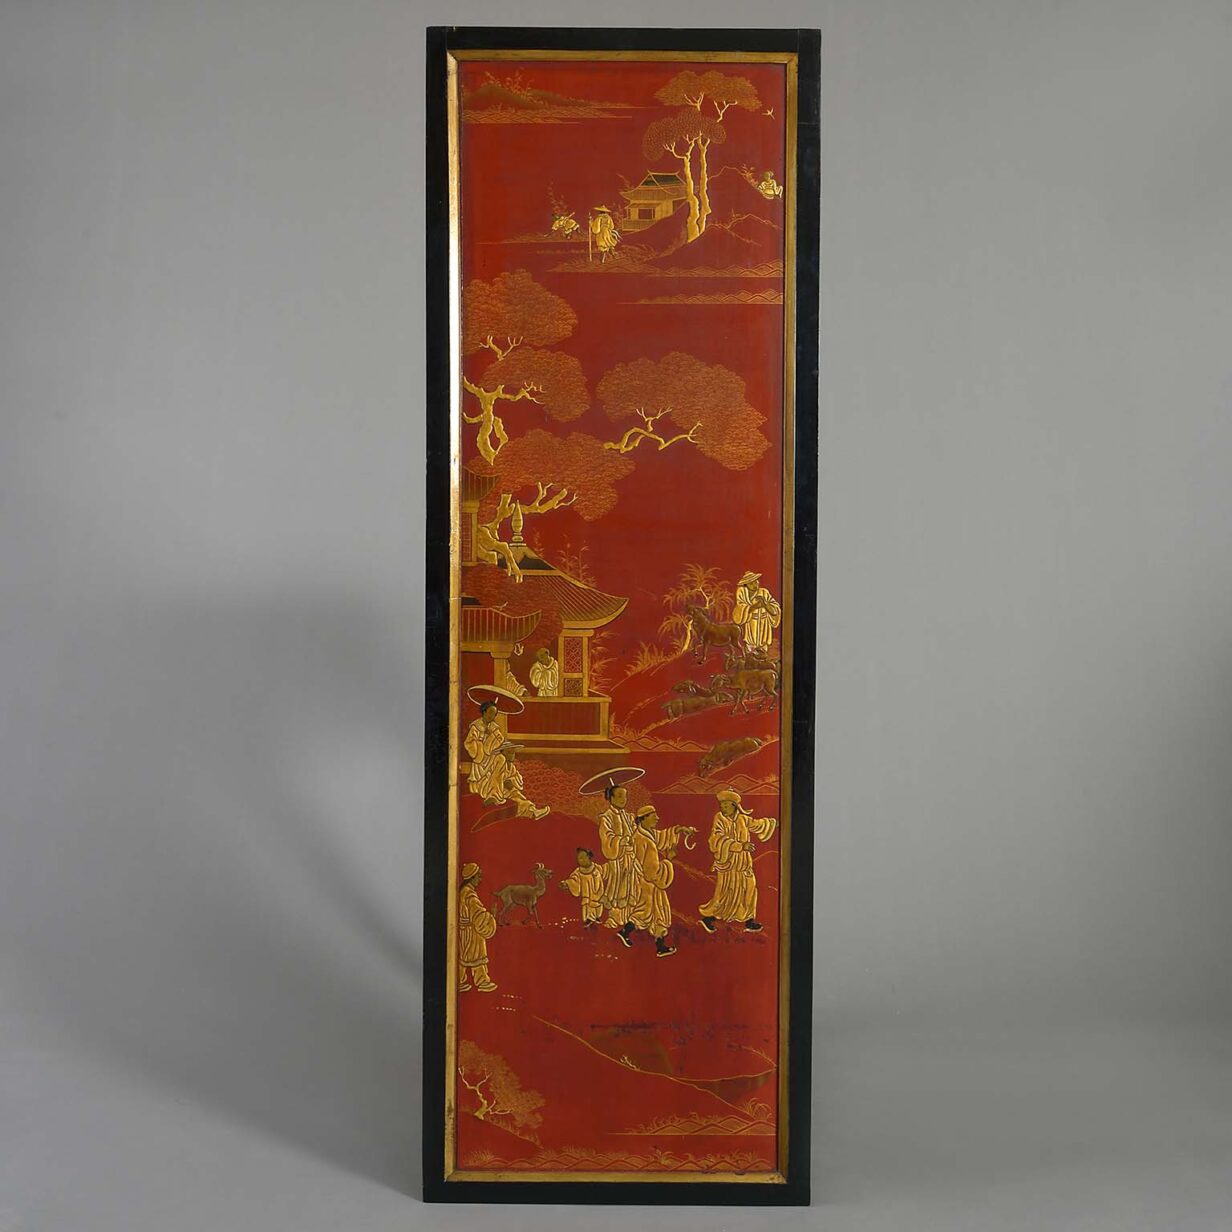 Four red lacquer chinoiserie panels